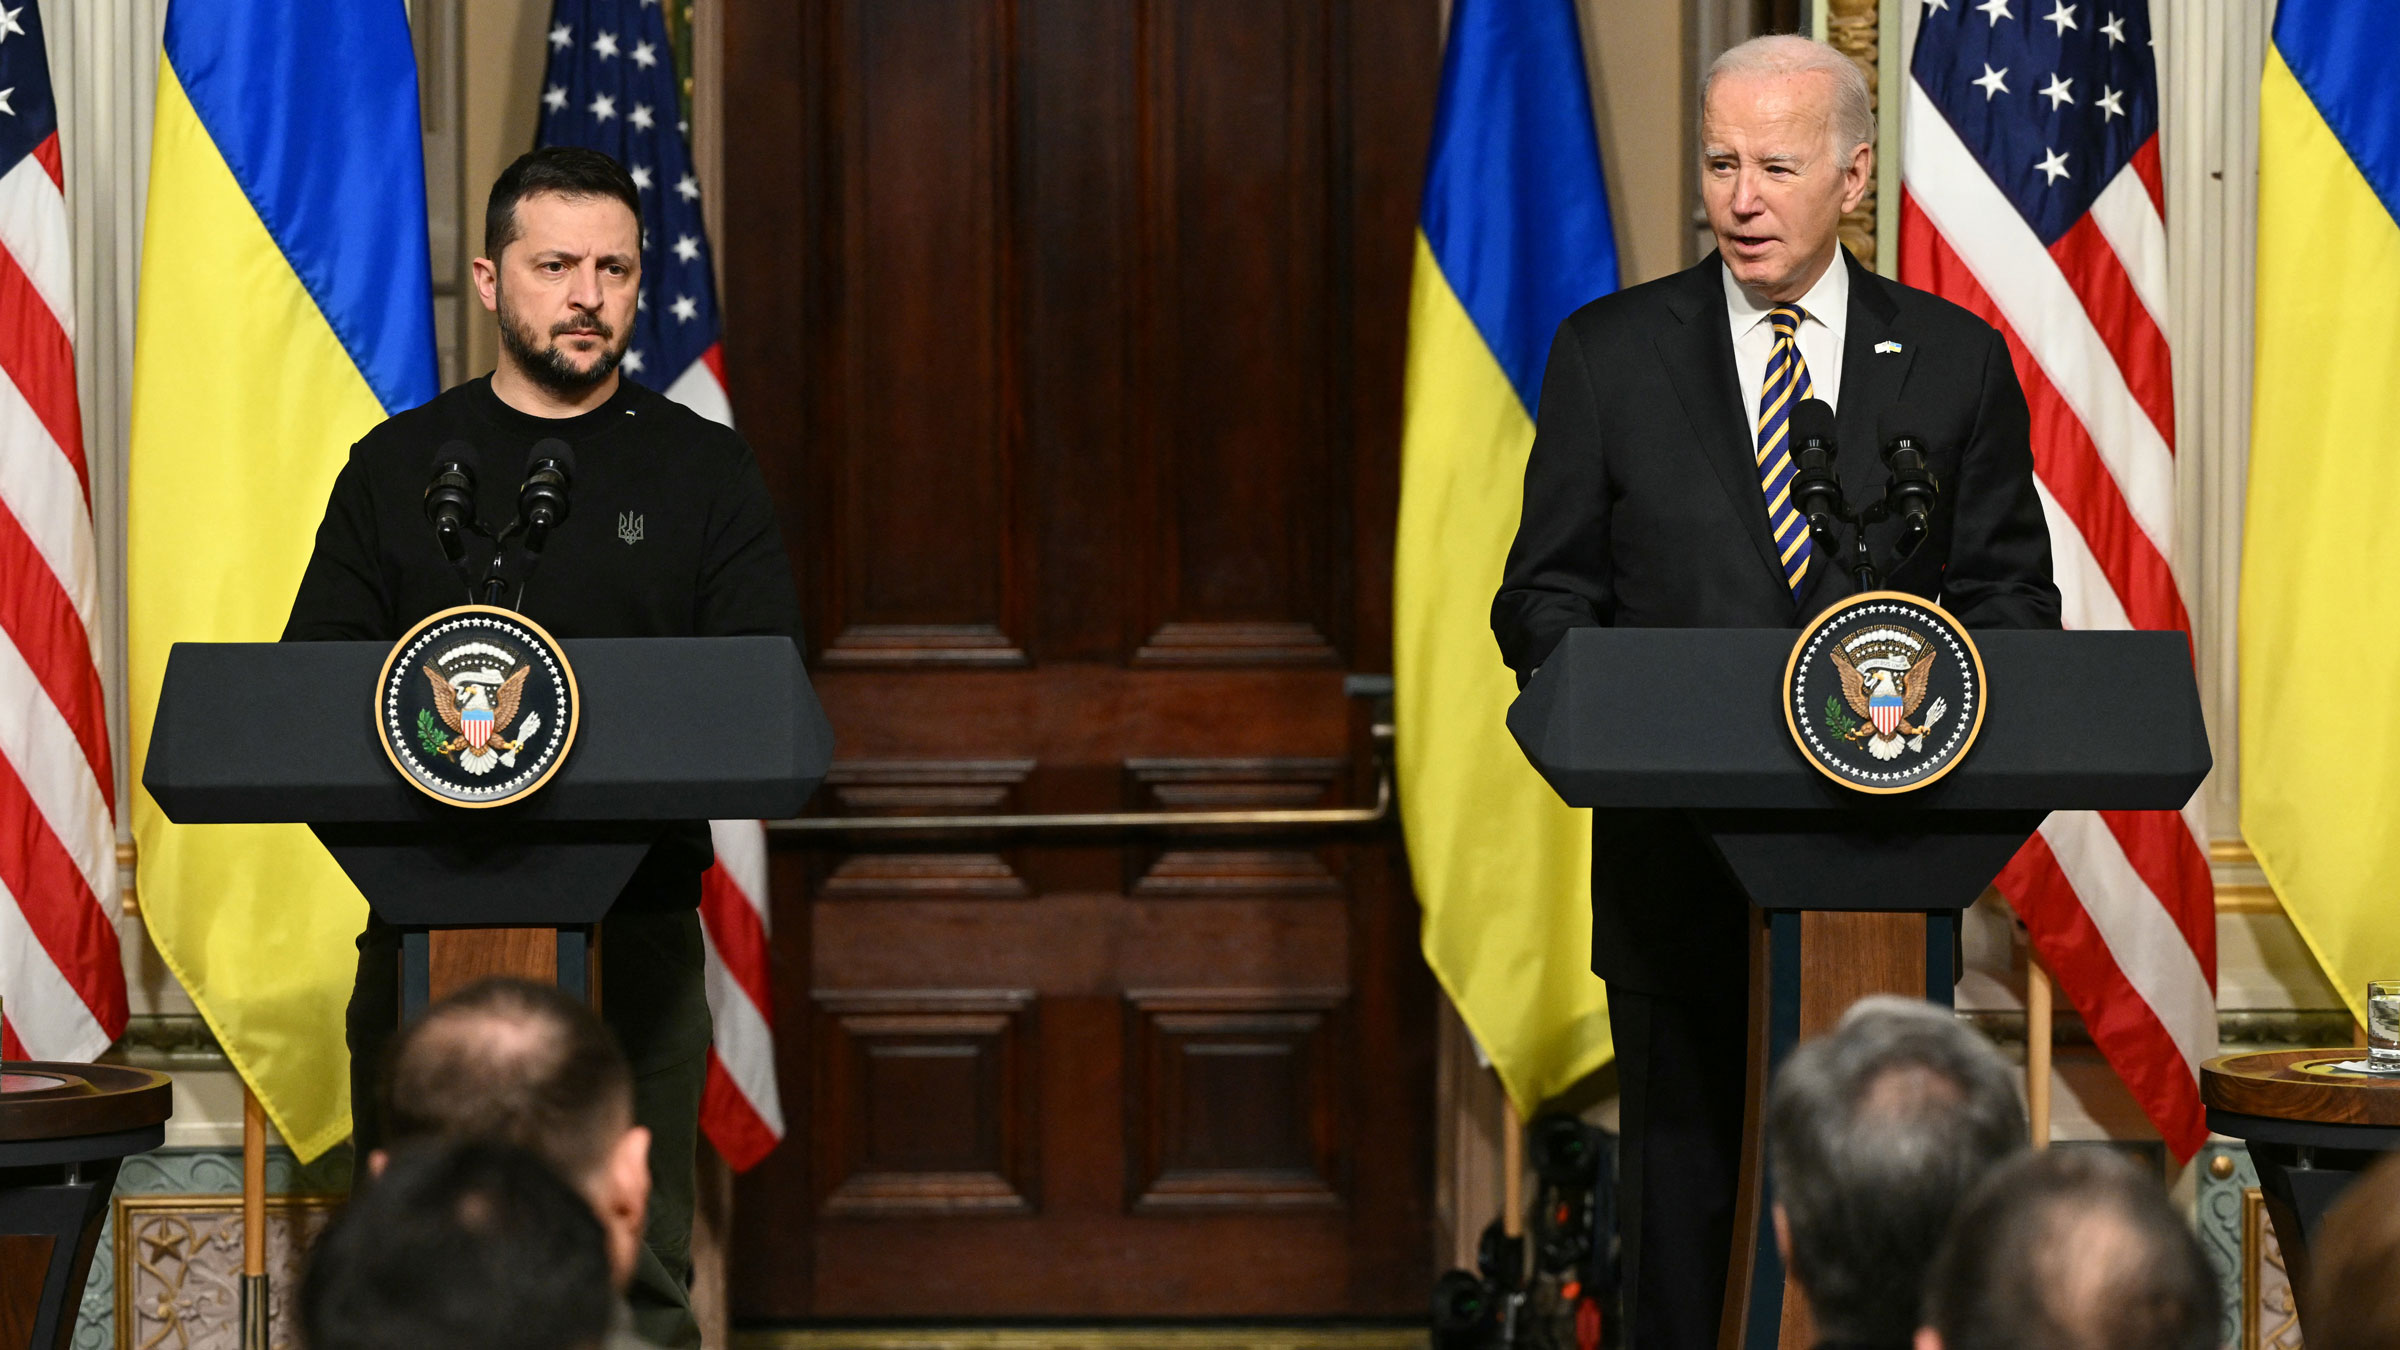 US President Joe Biden, right, and Ukrainian President Volodymyr Zelensky hold a joint news conference at the White House on Tuesday.